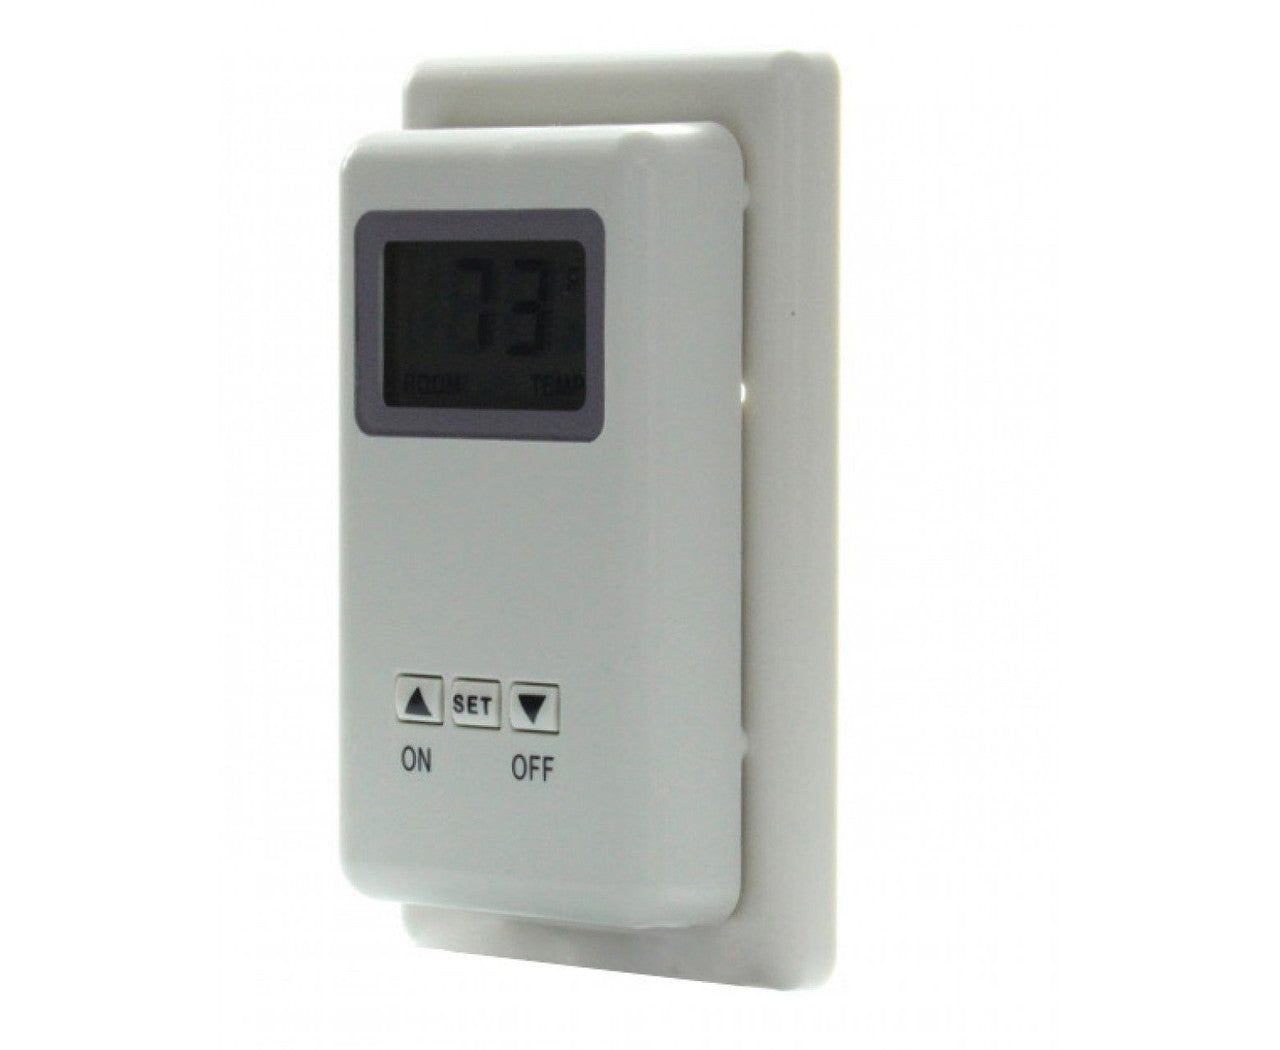 TS-3 Wired Wall Mounted Thermostat Fireplace Control